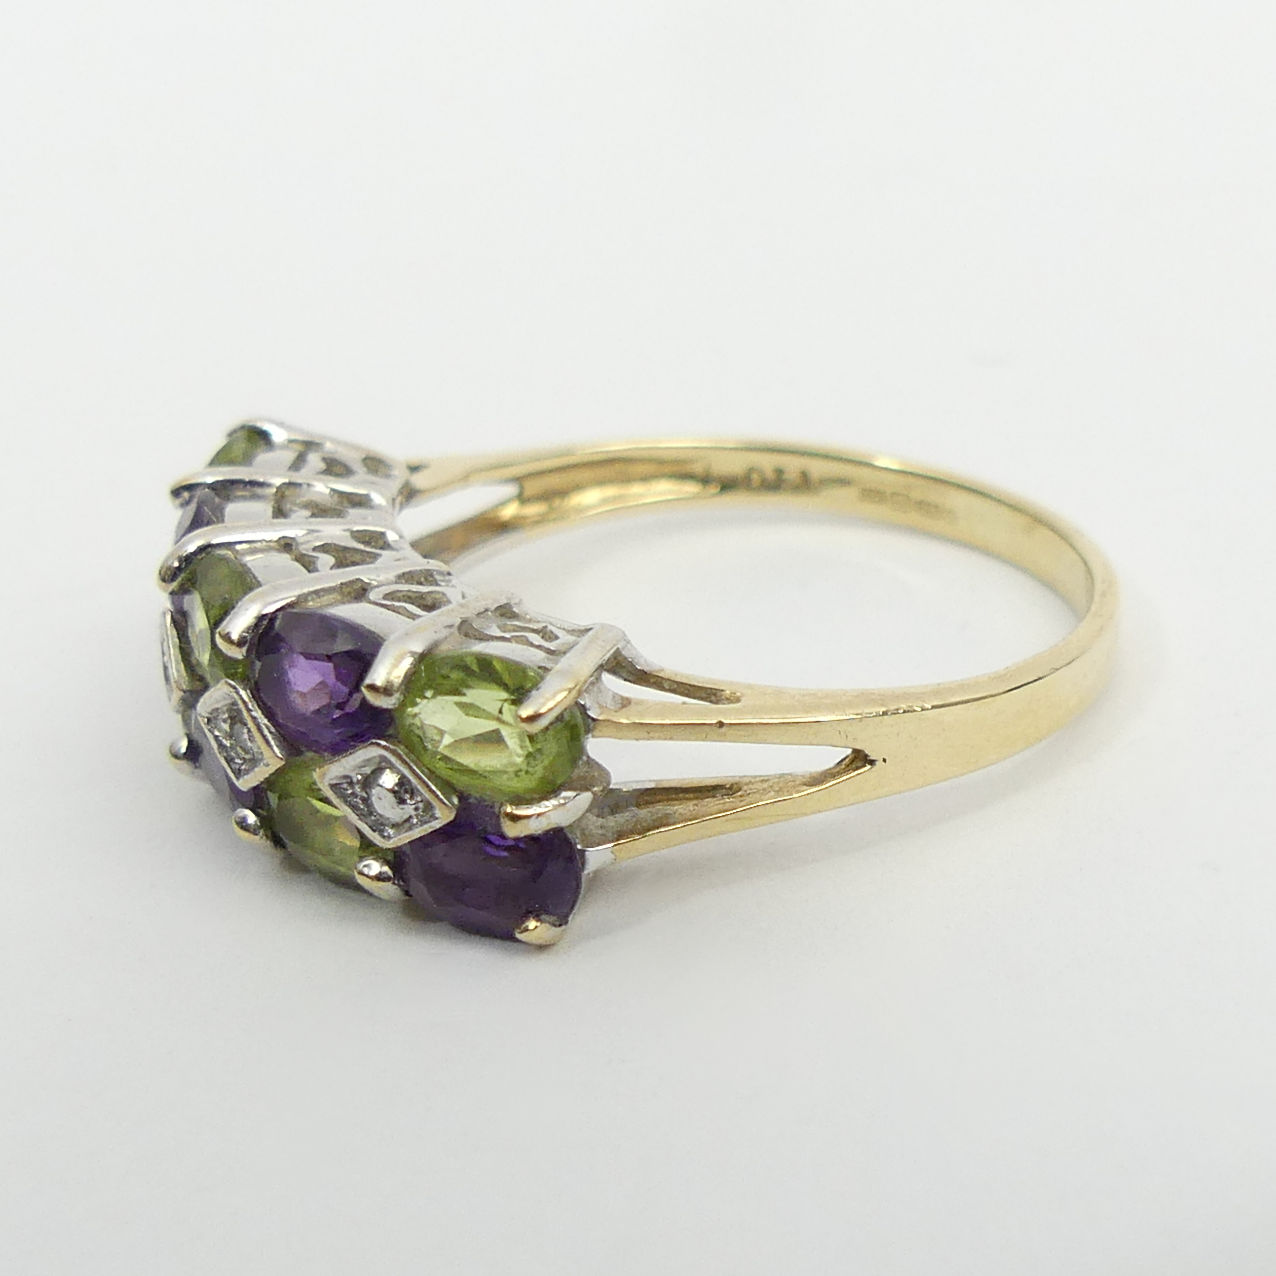 9ct gold peridot, amethyst and diamond ring, 2.4 grams, 6.6mm, size M 1/2. UK Postage £12. - Image 3 of 6